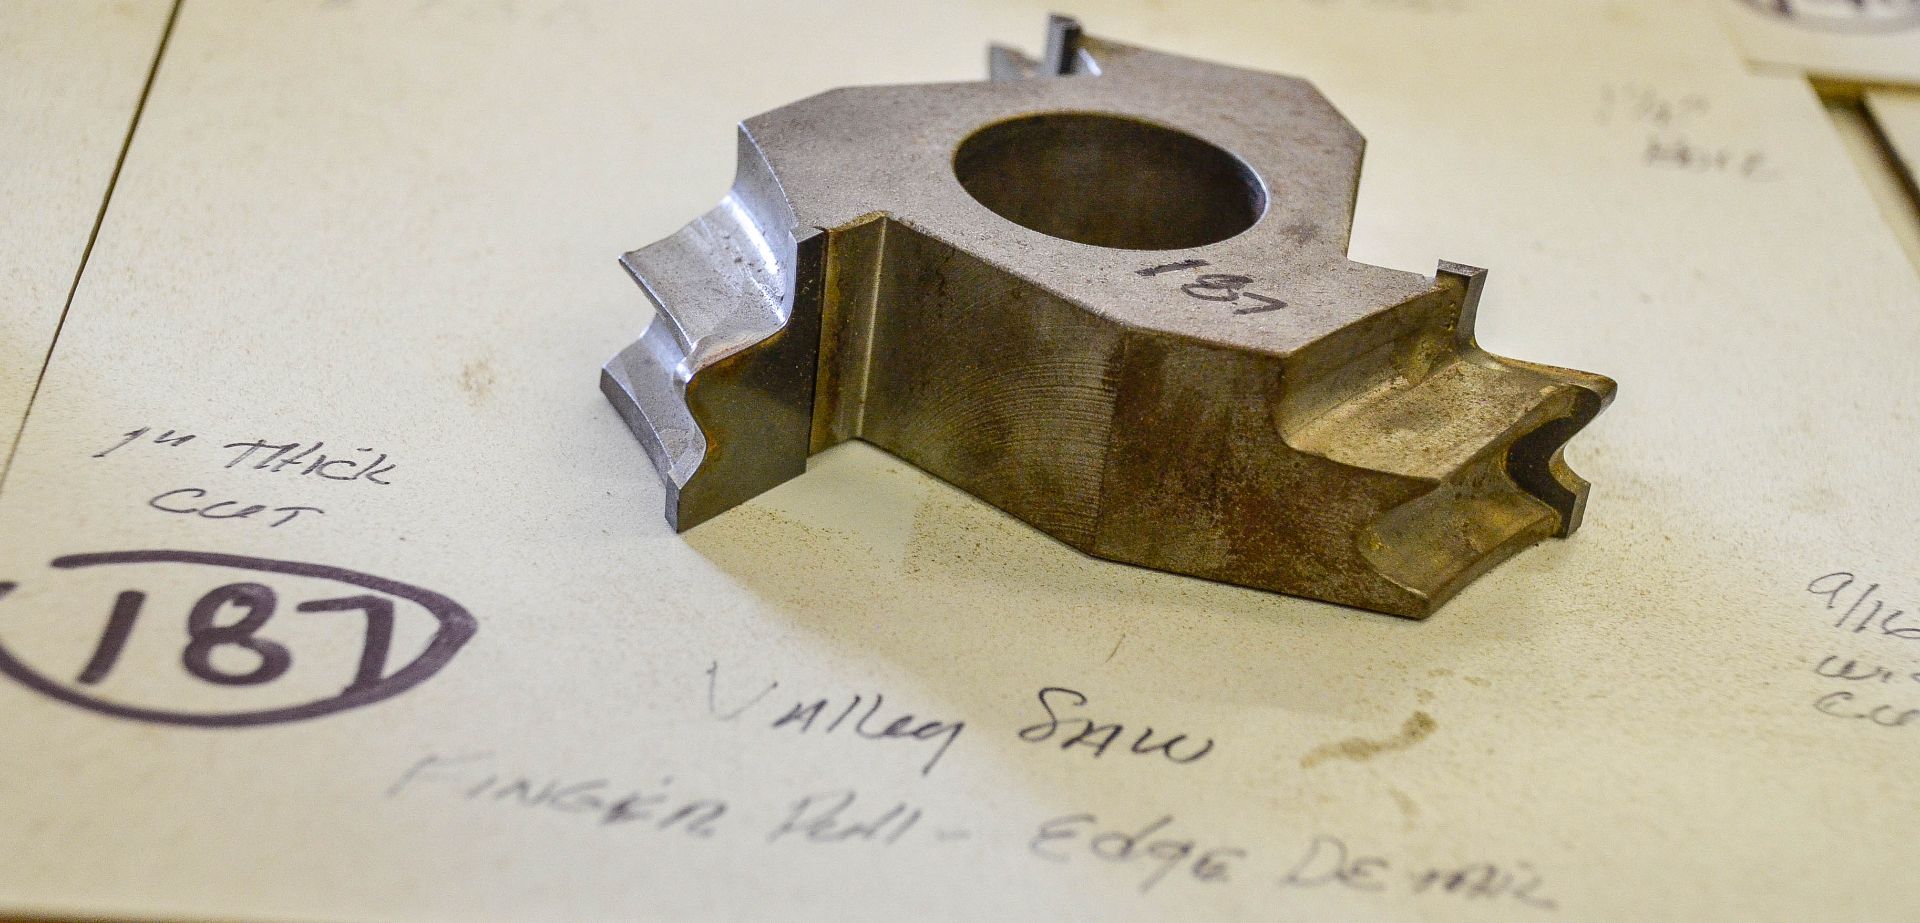 Shaper Cutter, Valley Saw, Fingerpull or Edge Detail 1" Thick Cut, 9/16" Wide Cut, 4-1/4" Outsi - Image 2 of 2